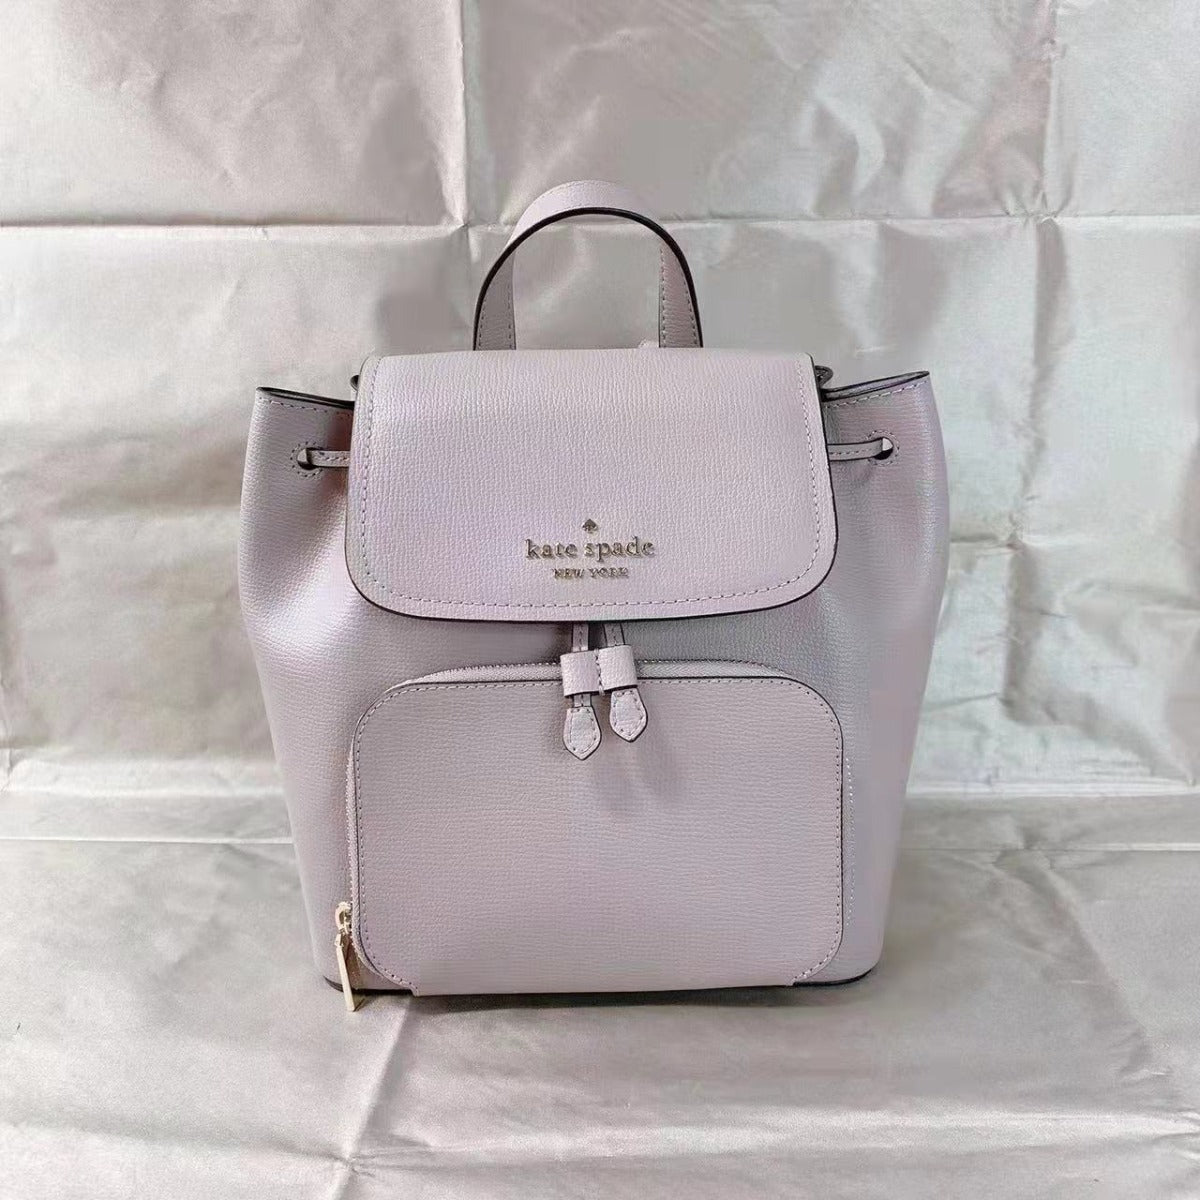 Kate Spade WKR00548 darcy flap backpack in warm taupe 196021025068